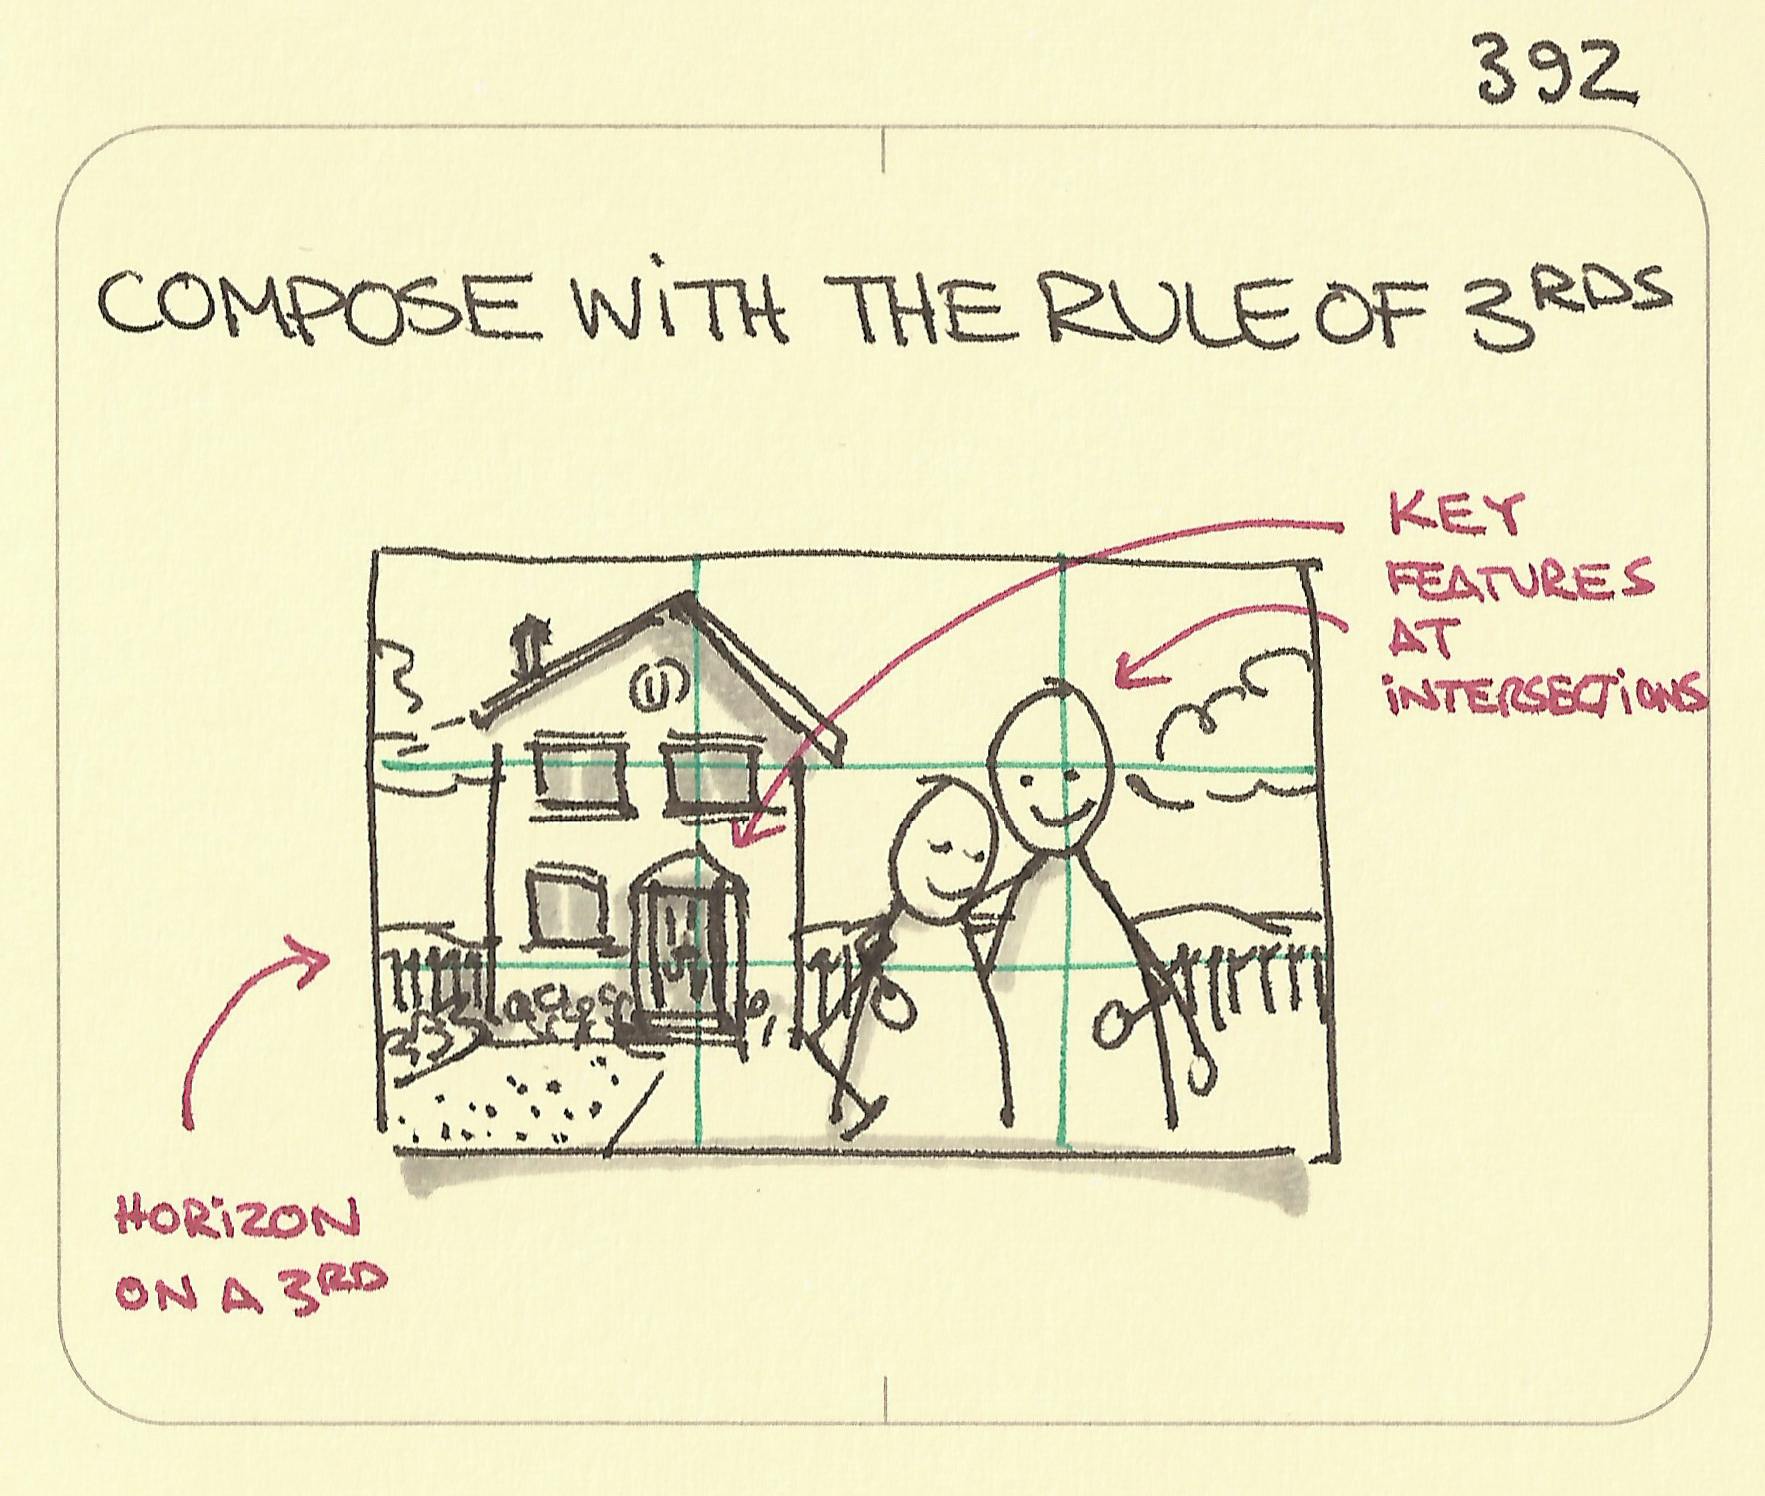 Compose with the rule of thirds - Sketchplanations